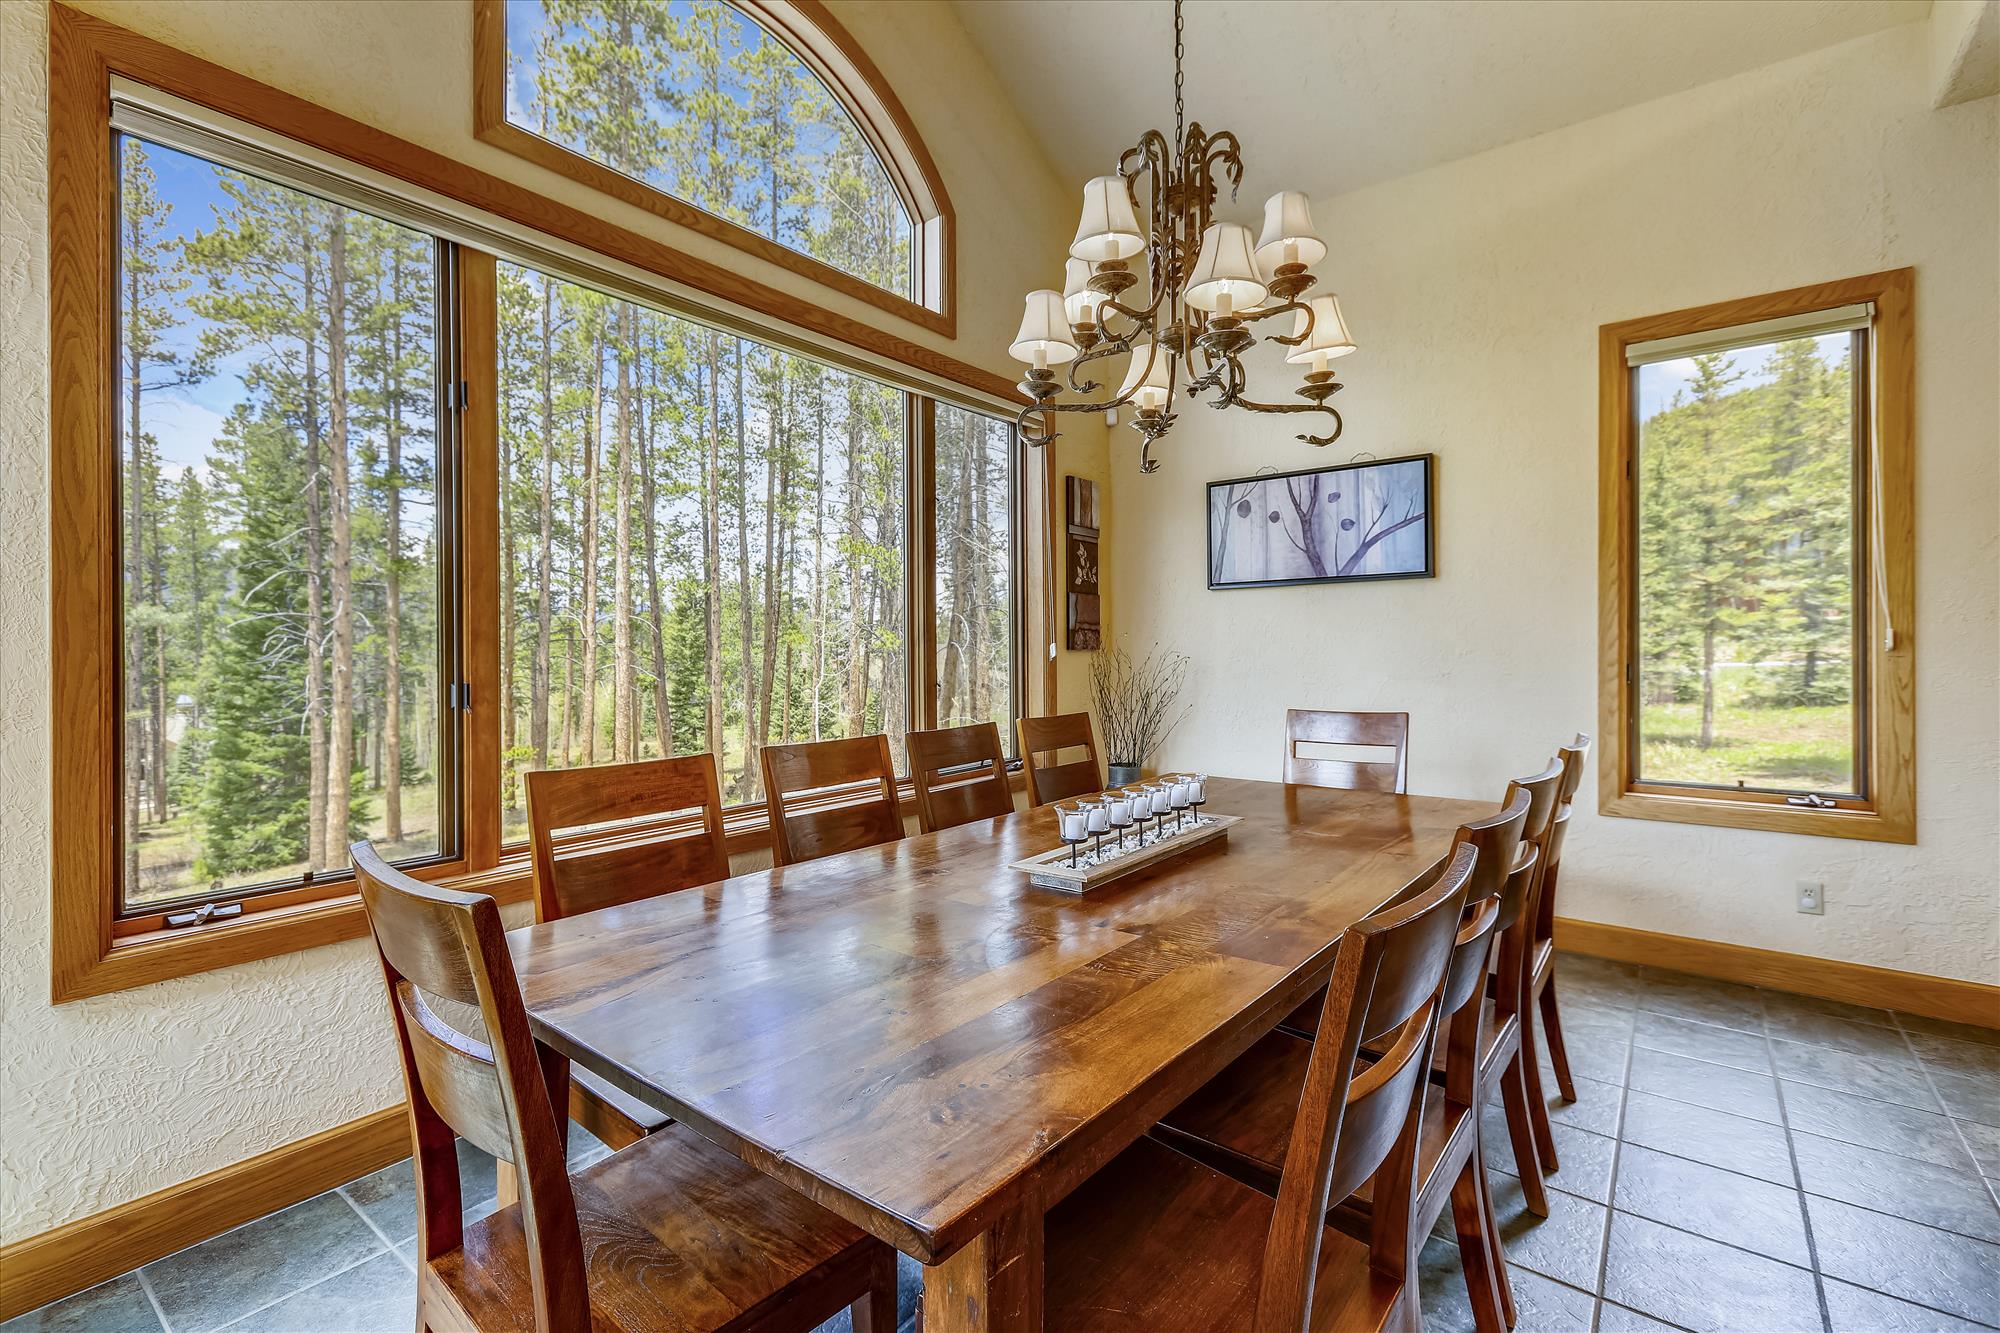 Enjoy a family dinner with gorgeous views from the dining room - Evergreen Lodge Breckenridge Vacation Rental